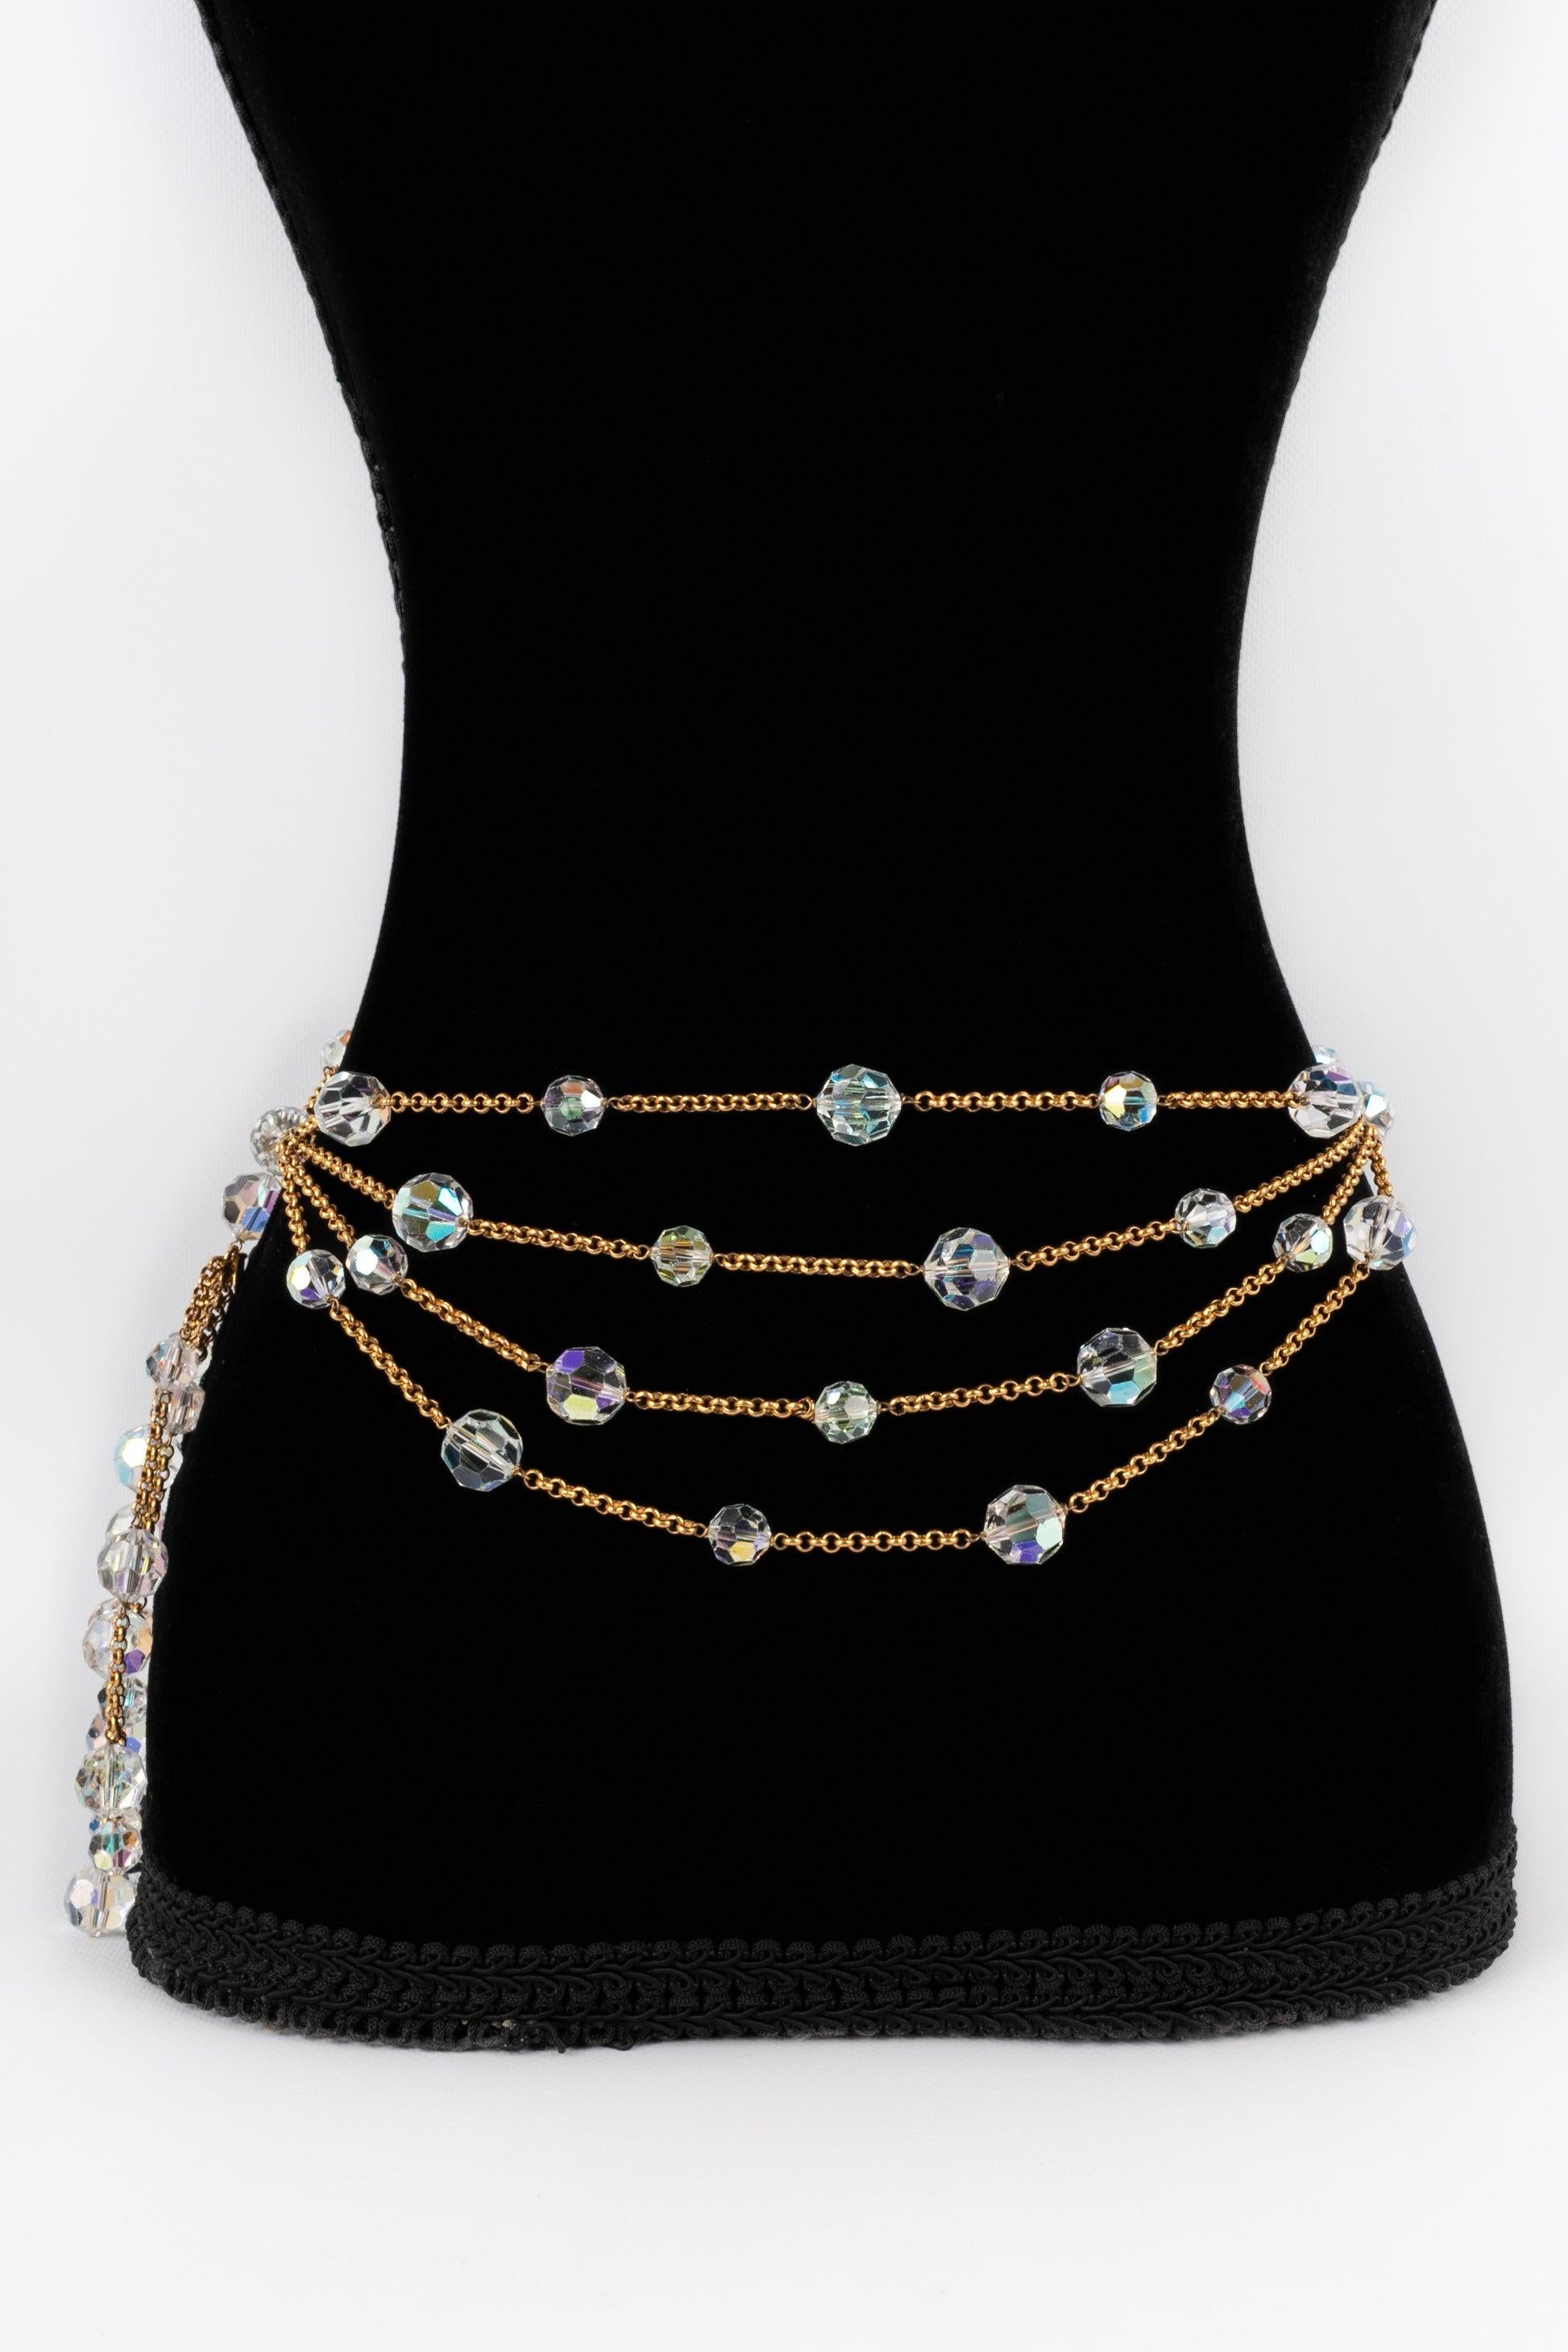 Chanel Golden Metal Belt with Faceted Pearls, 1992 For Sale 1